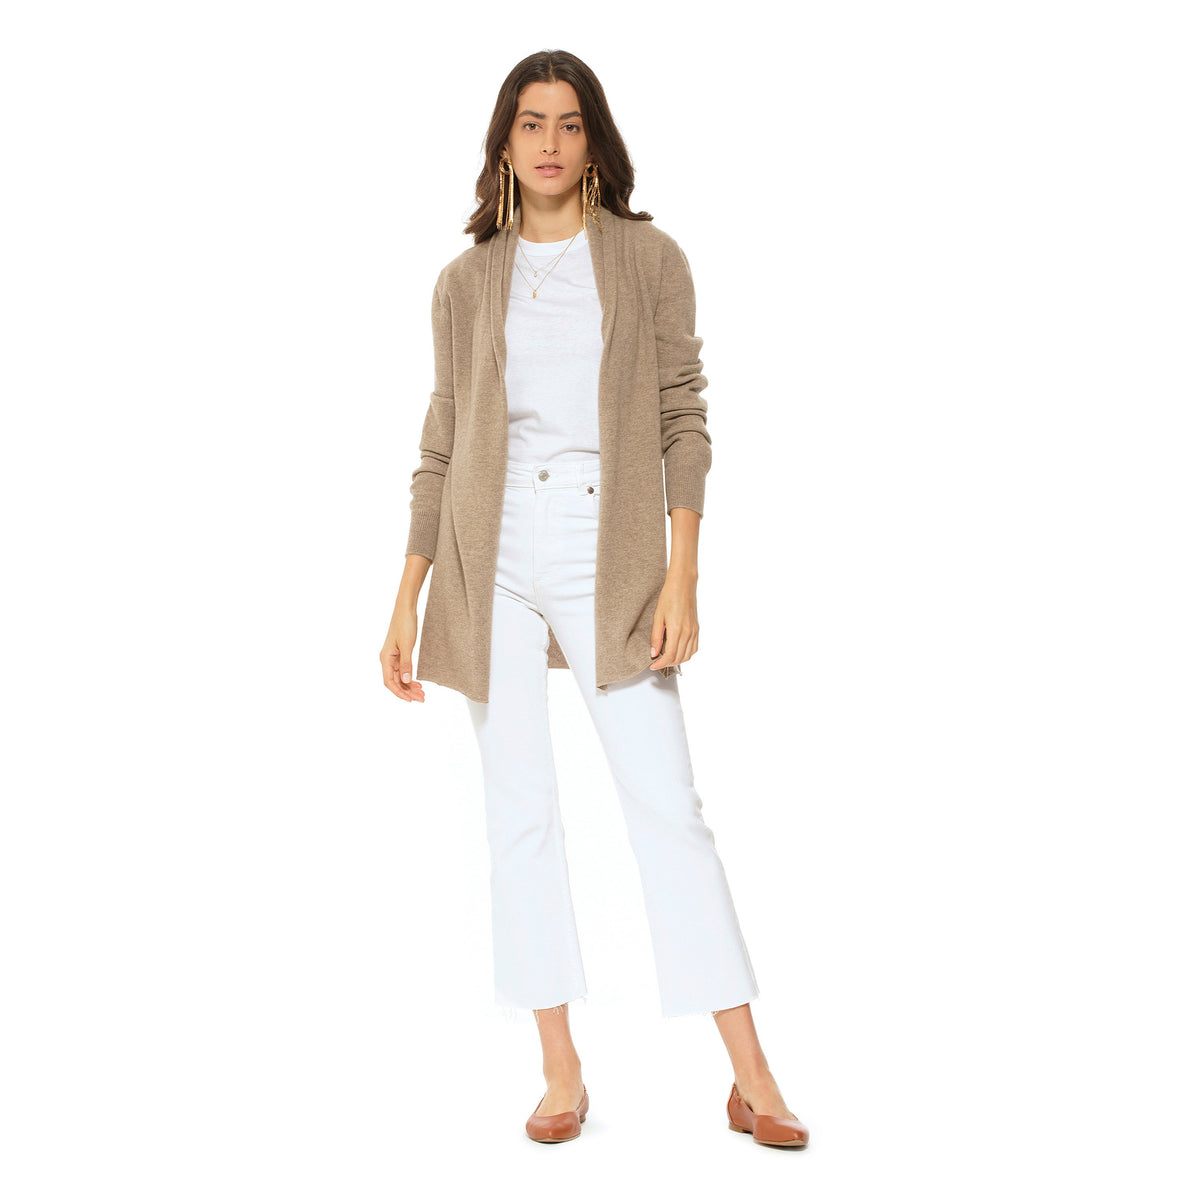 Women's Pure Cashmere Open Front Cardigan